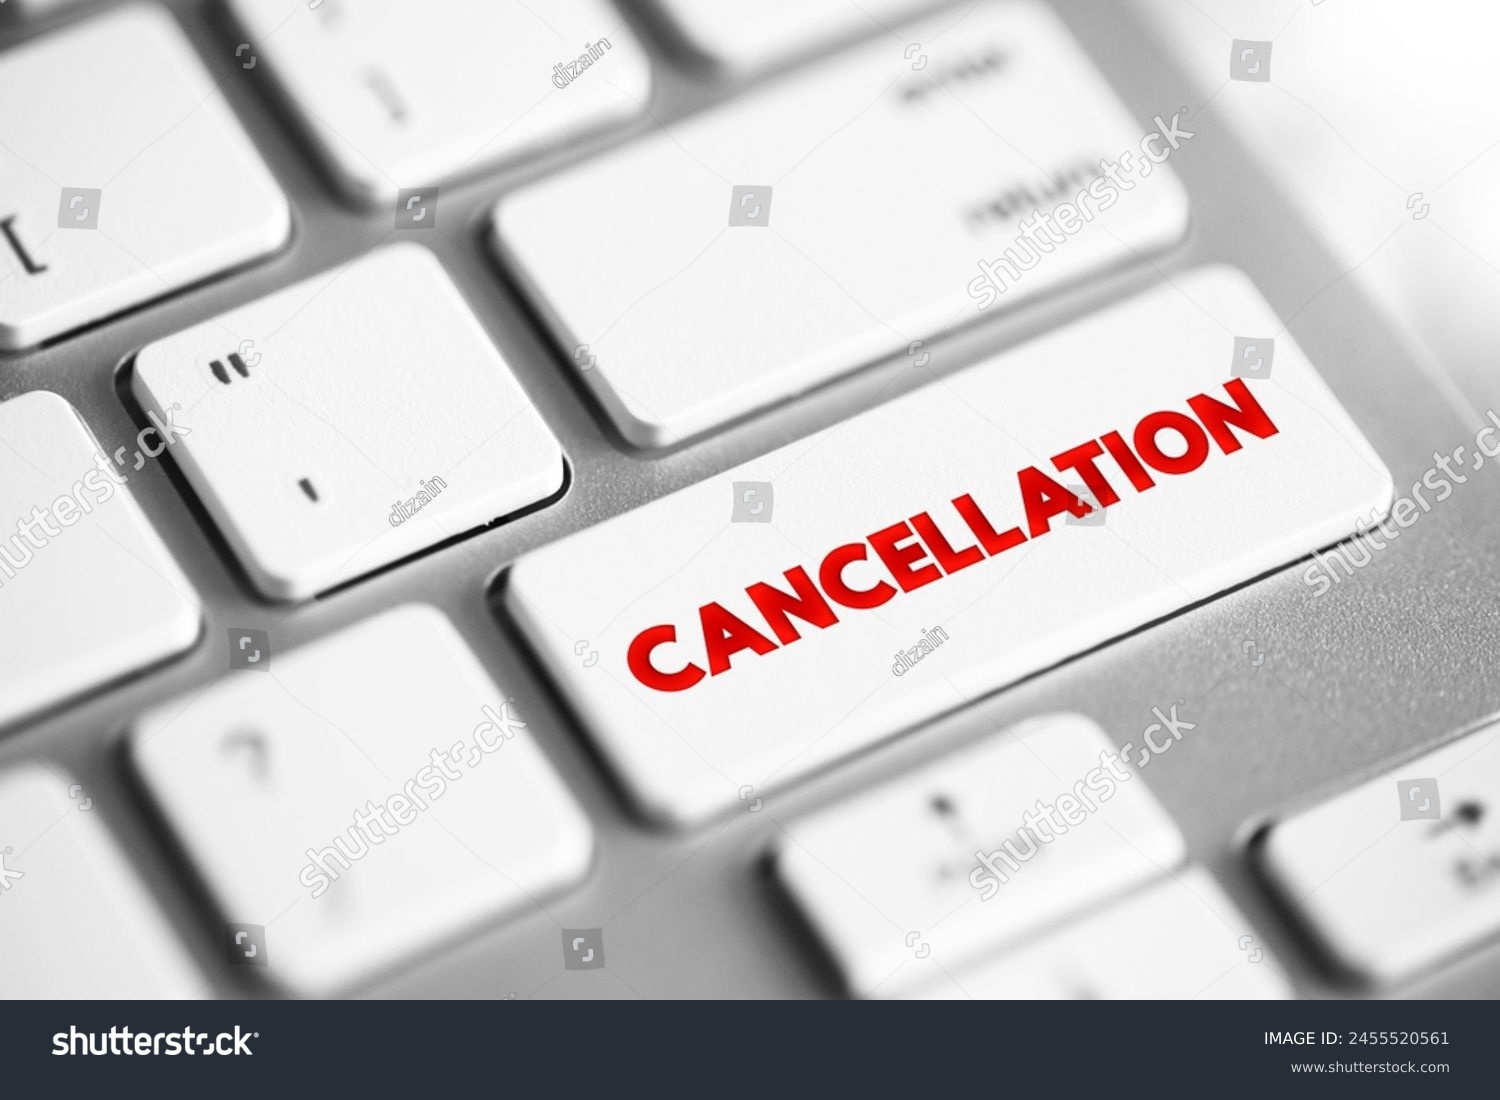 Cancellation - the action of cancelling something, text concept button on keyboard #2455520561